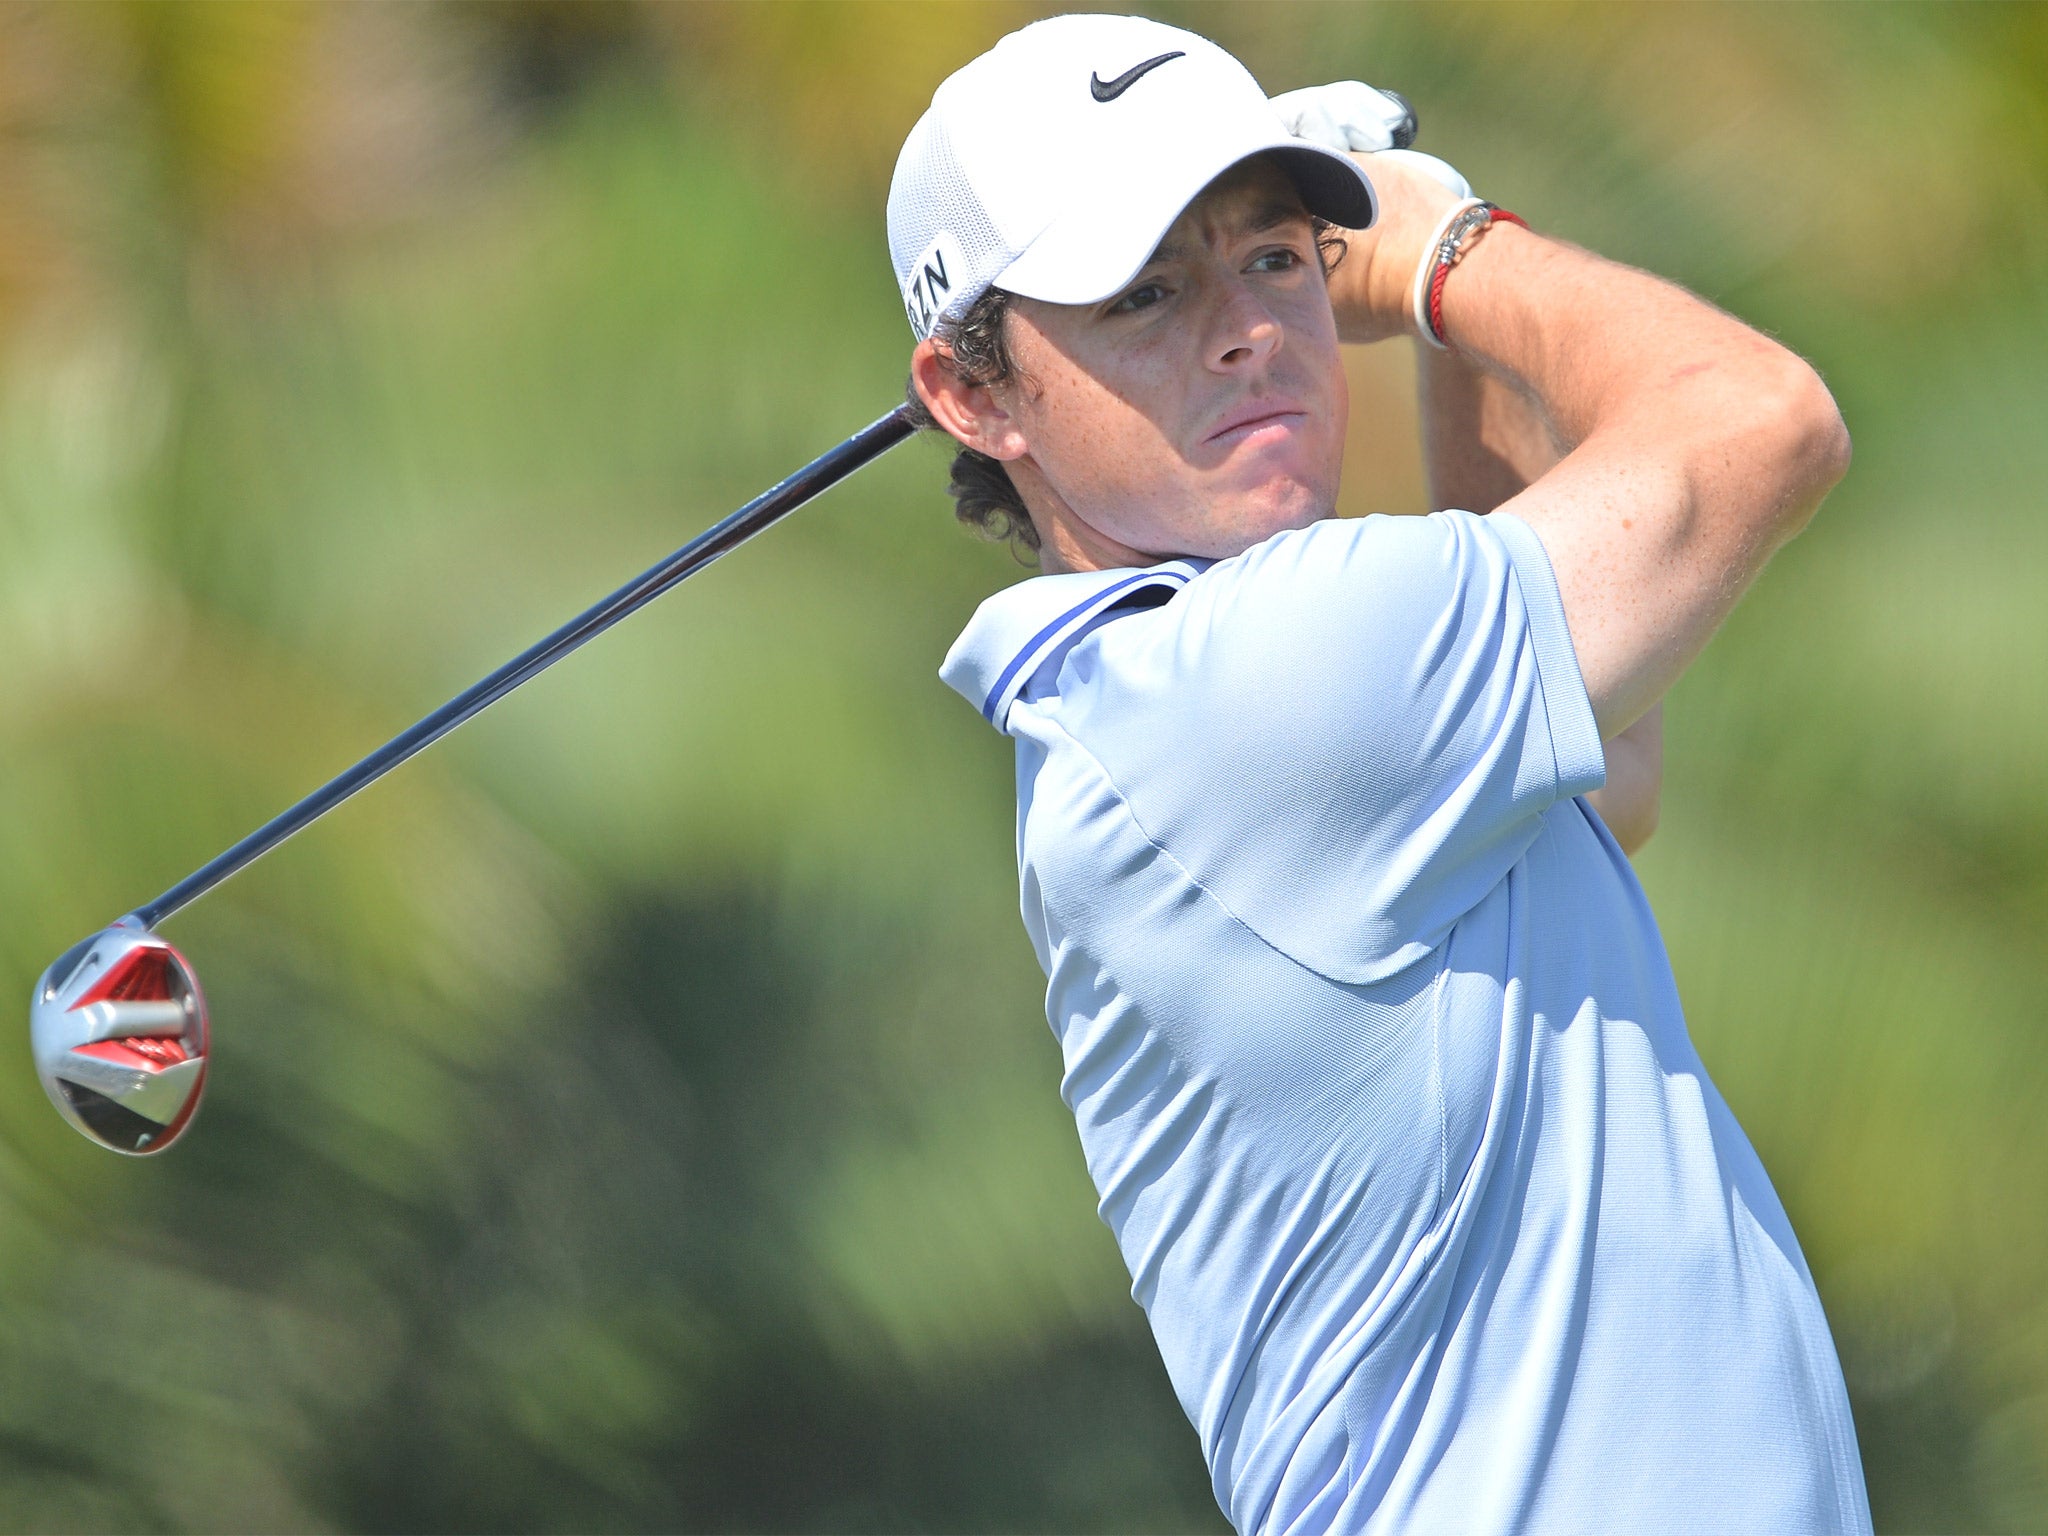 Rory McIlroy says he has to mature if he wants to be world No 1 again after a dismal time last year